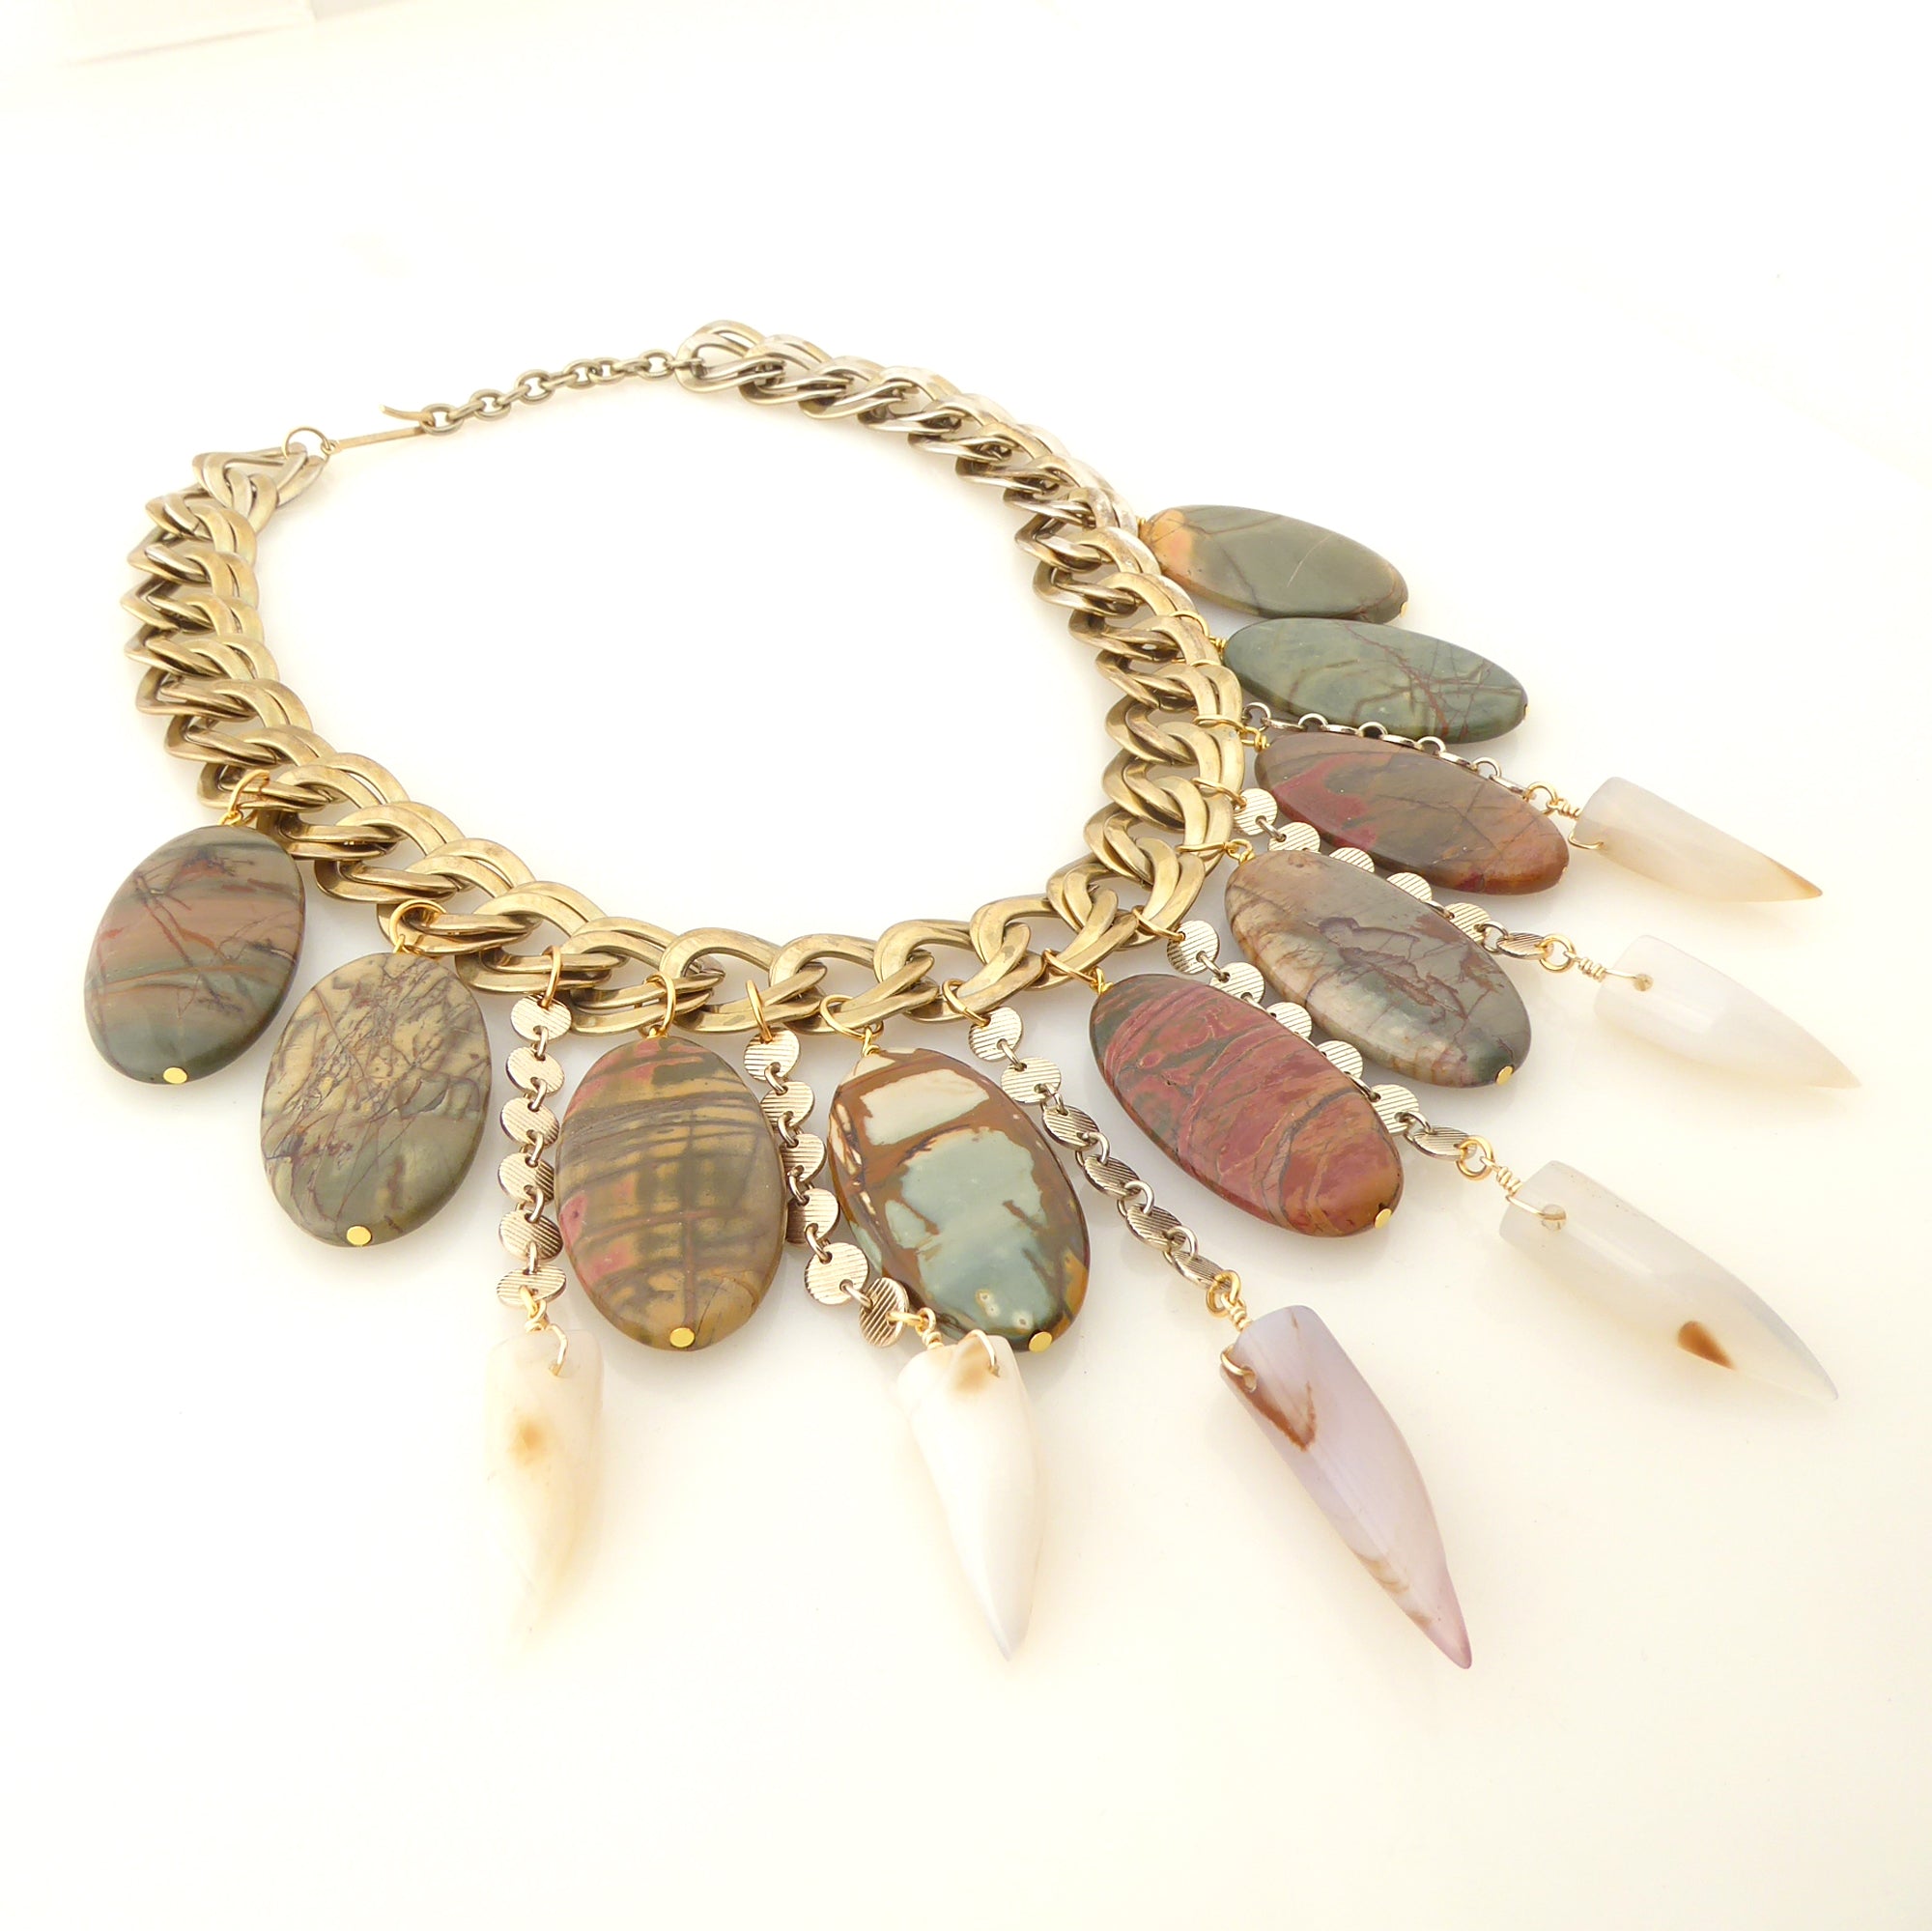 Red creek jasper and agate tusk necklace by Jenny Dayco 2